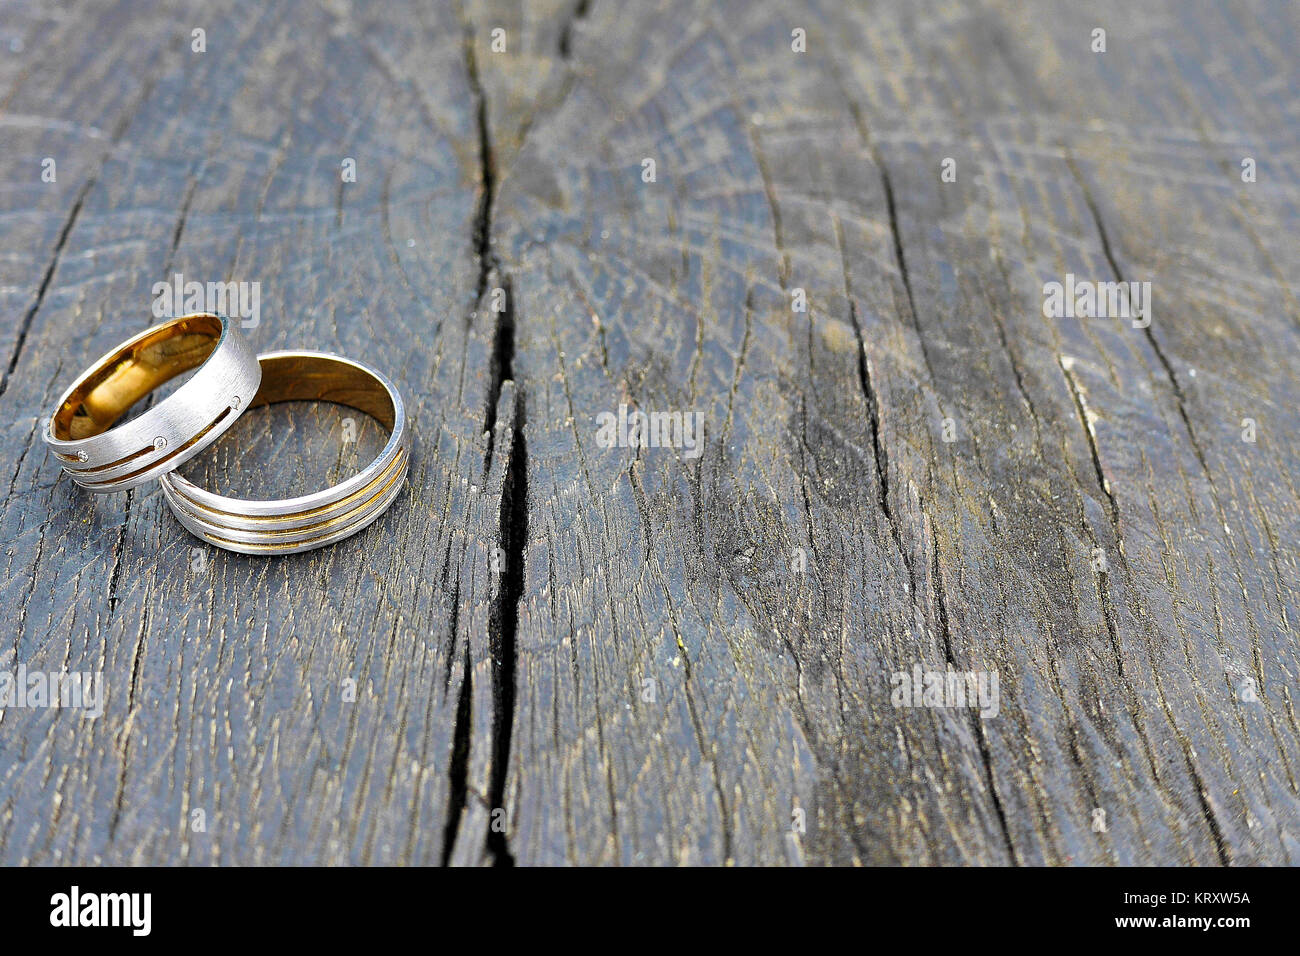 wedding and the wedding rings Stock Photo